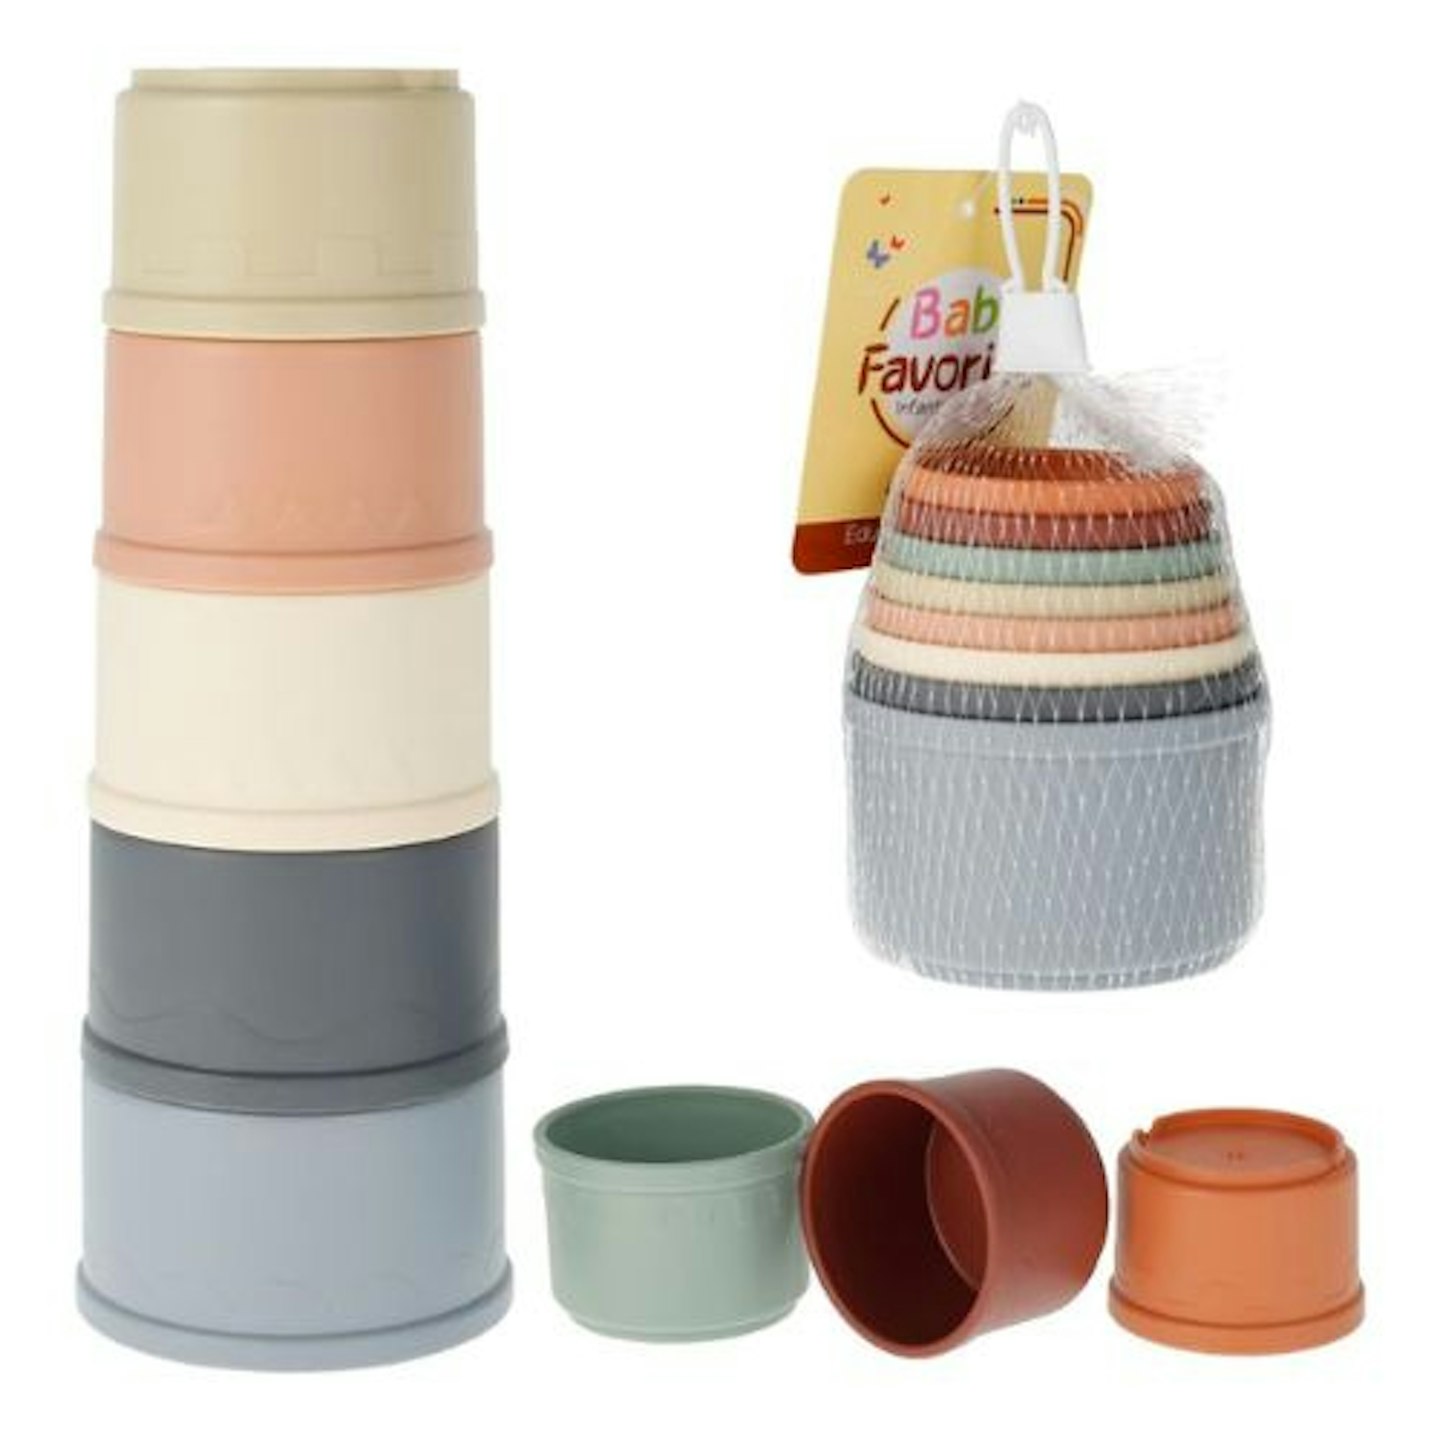 Best stacking toys 8pcs Stacking Cups Toy for Kids